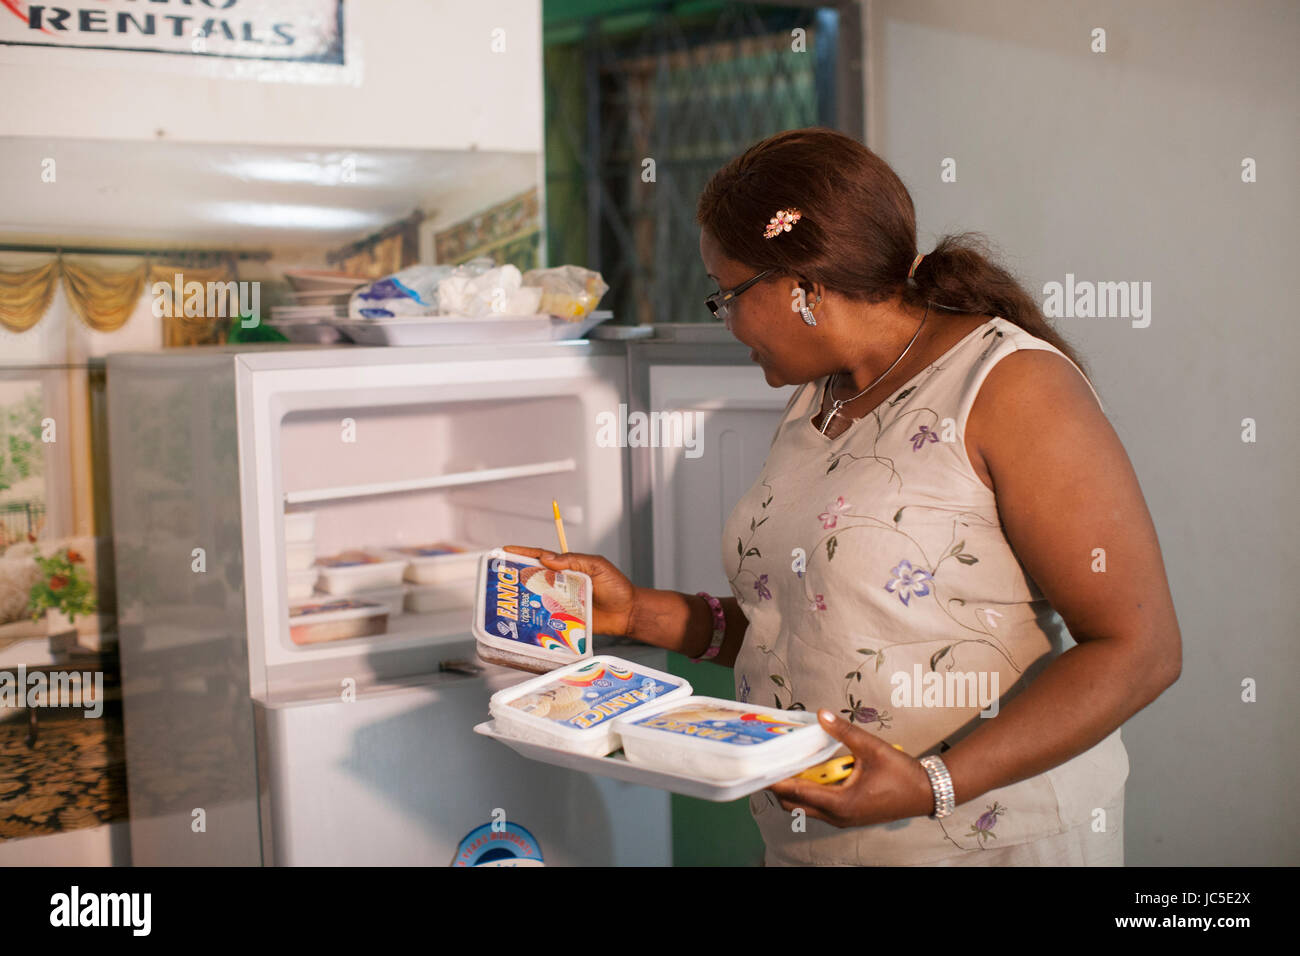 A business woman unloading her home made ice cream from the freezer. Nigeria, Africa. Stock Photo